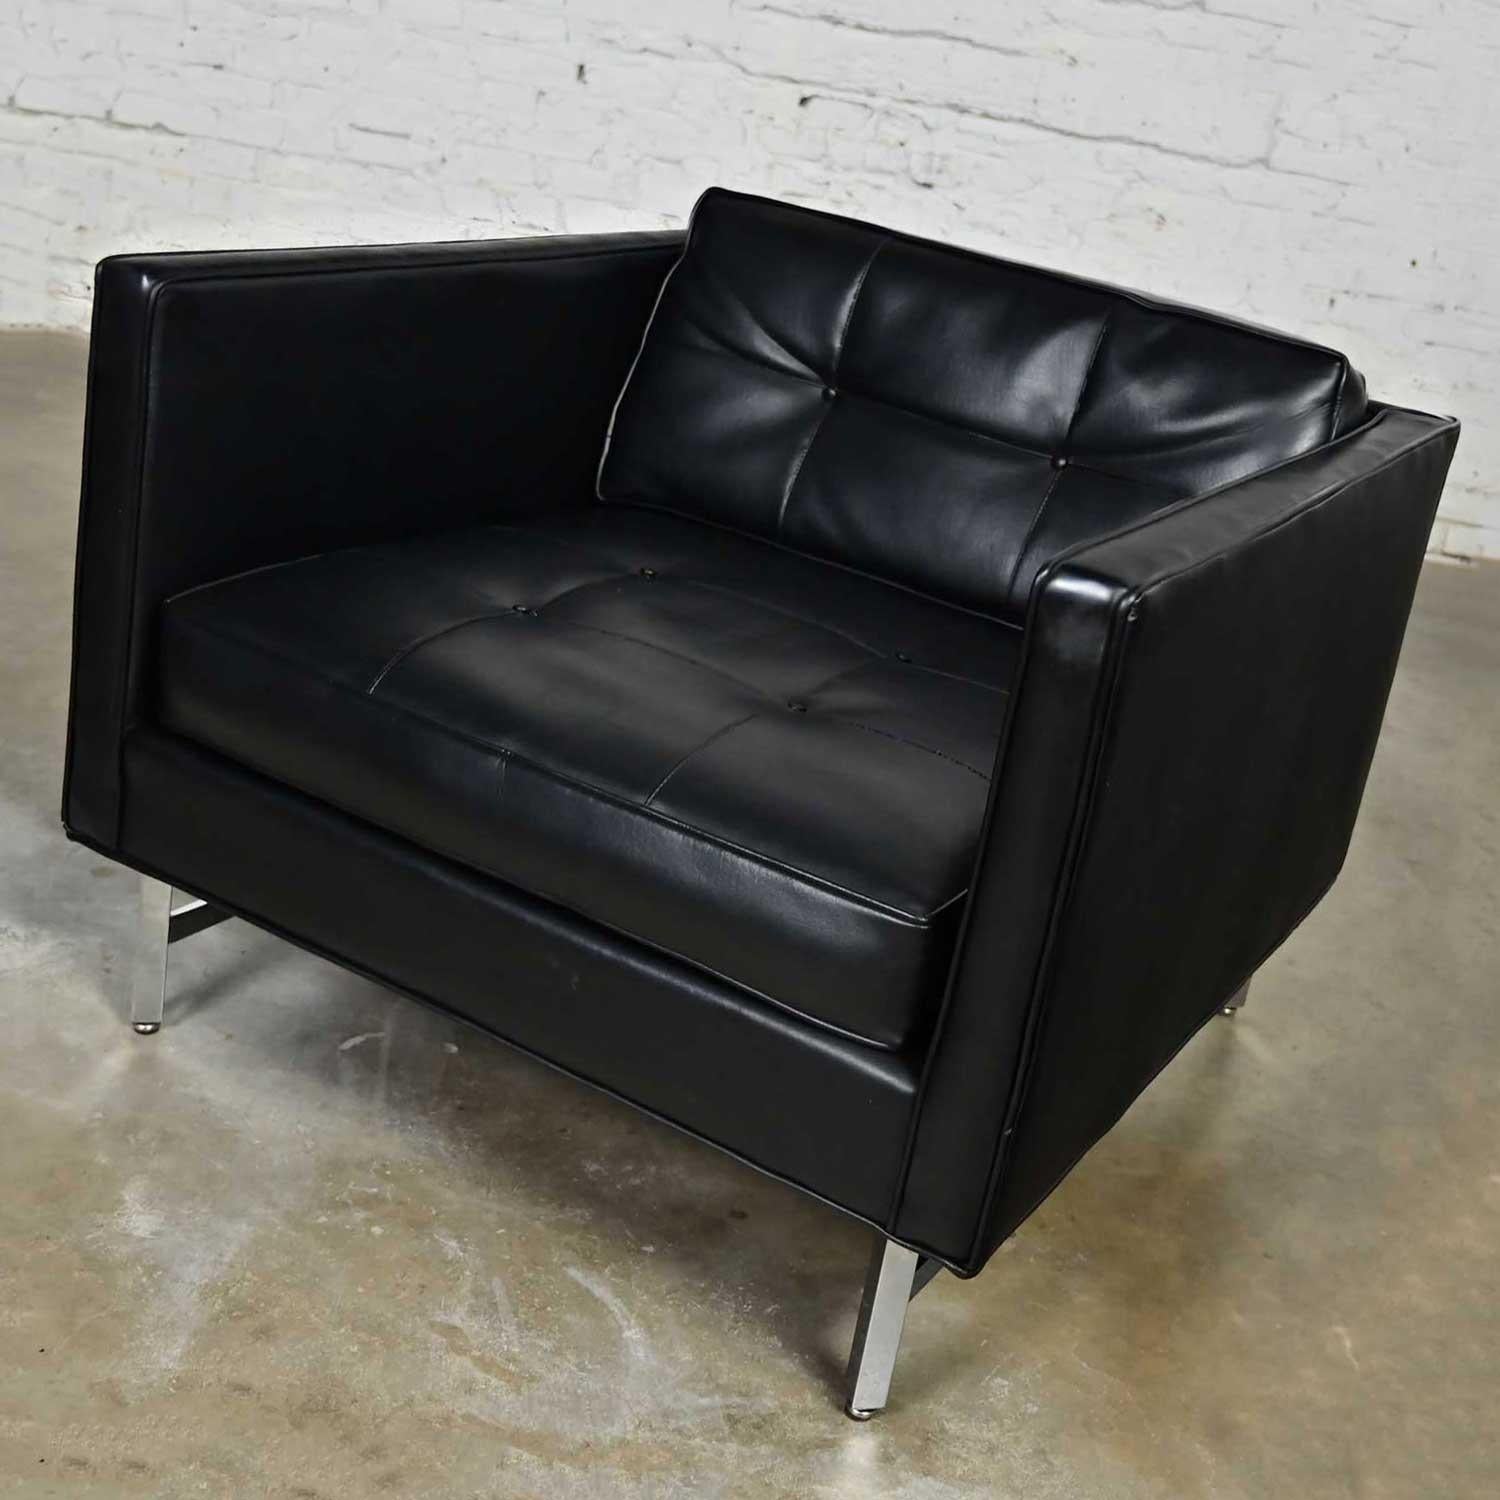 Handsome vintage modern Maurice Villency button black vinyl faux leather cube armchair with chrome legs. Beautiful condition, keeping in mind that this is vintage and not new so will have signs of use and wear. The bottom of the seat has been